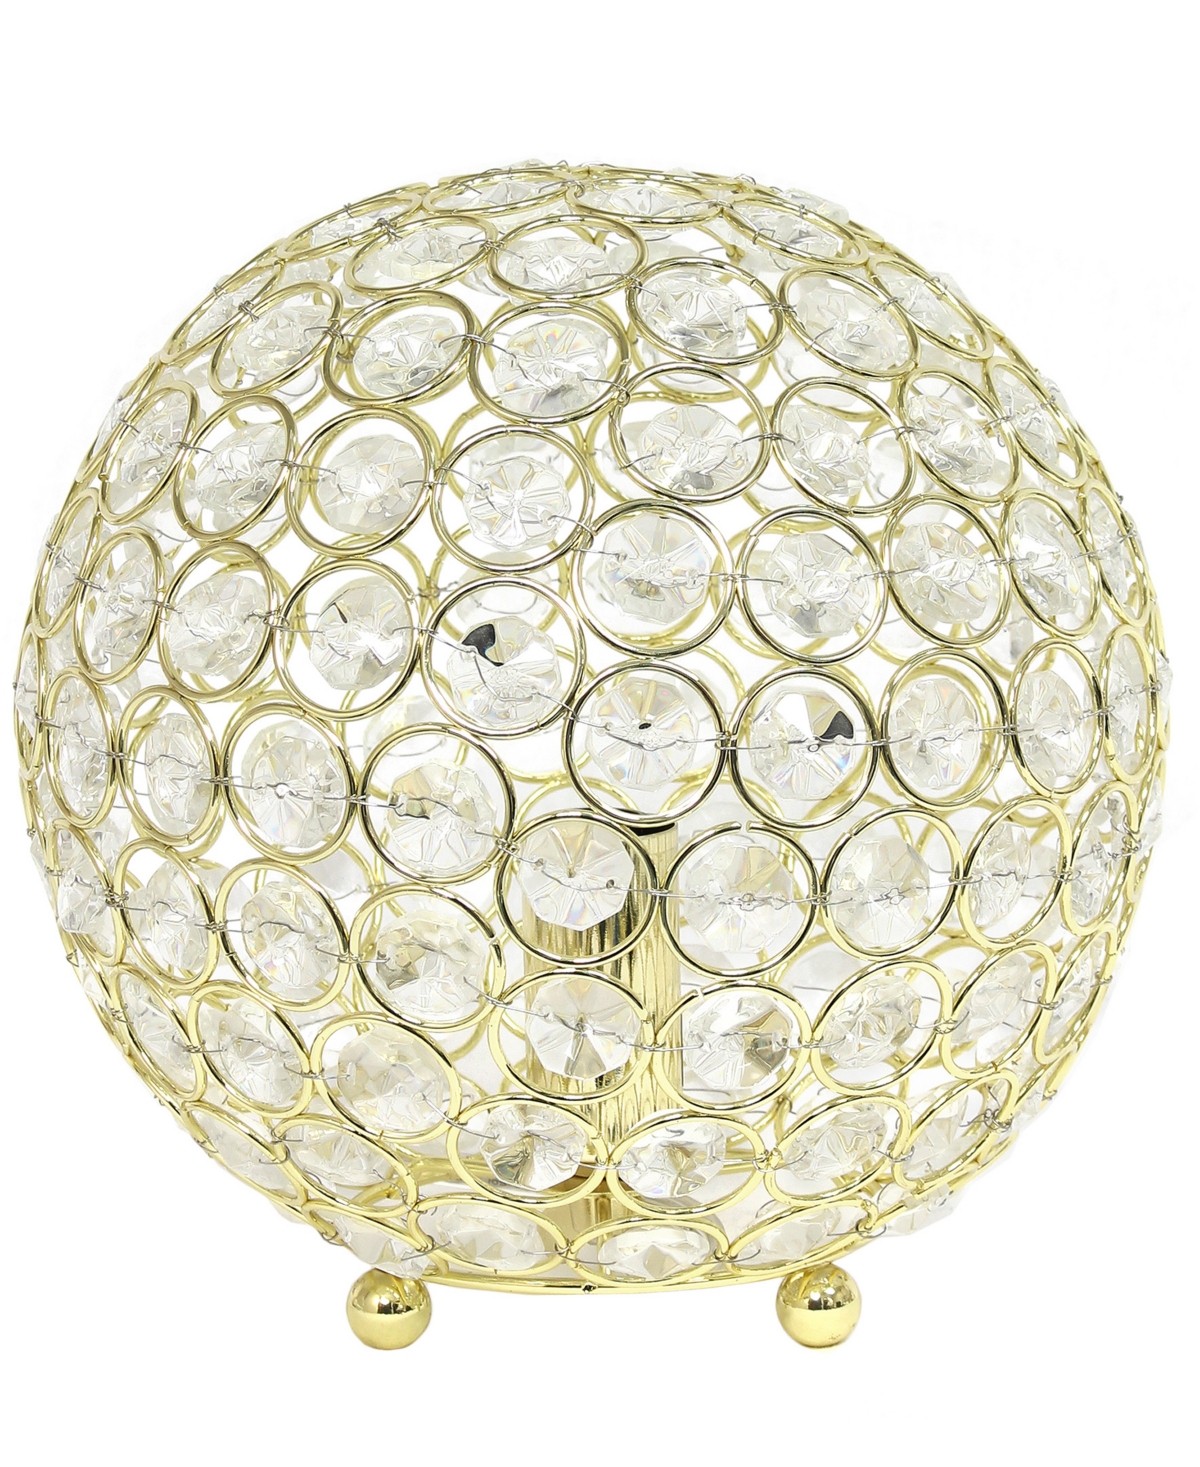 All The Rages Lalia Home Elipse 8" Metal Crystal Orb Table Lamp In Gold